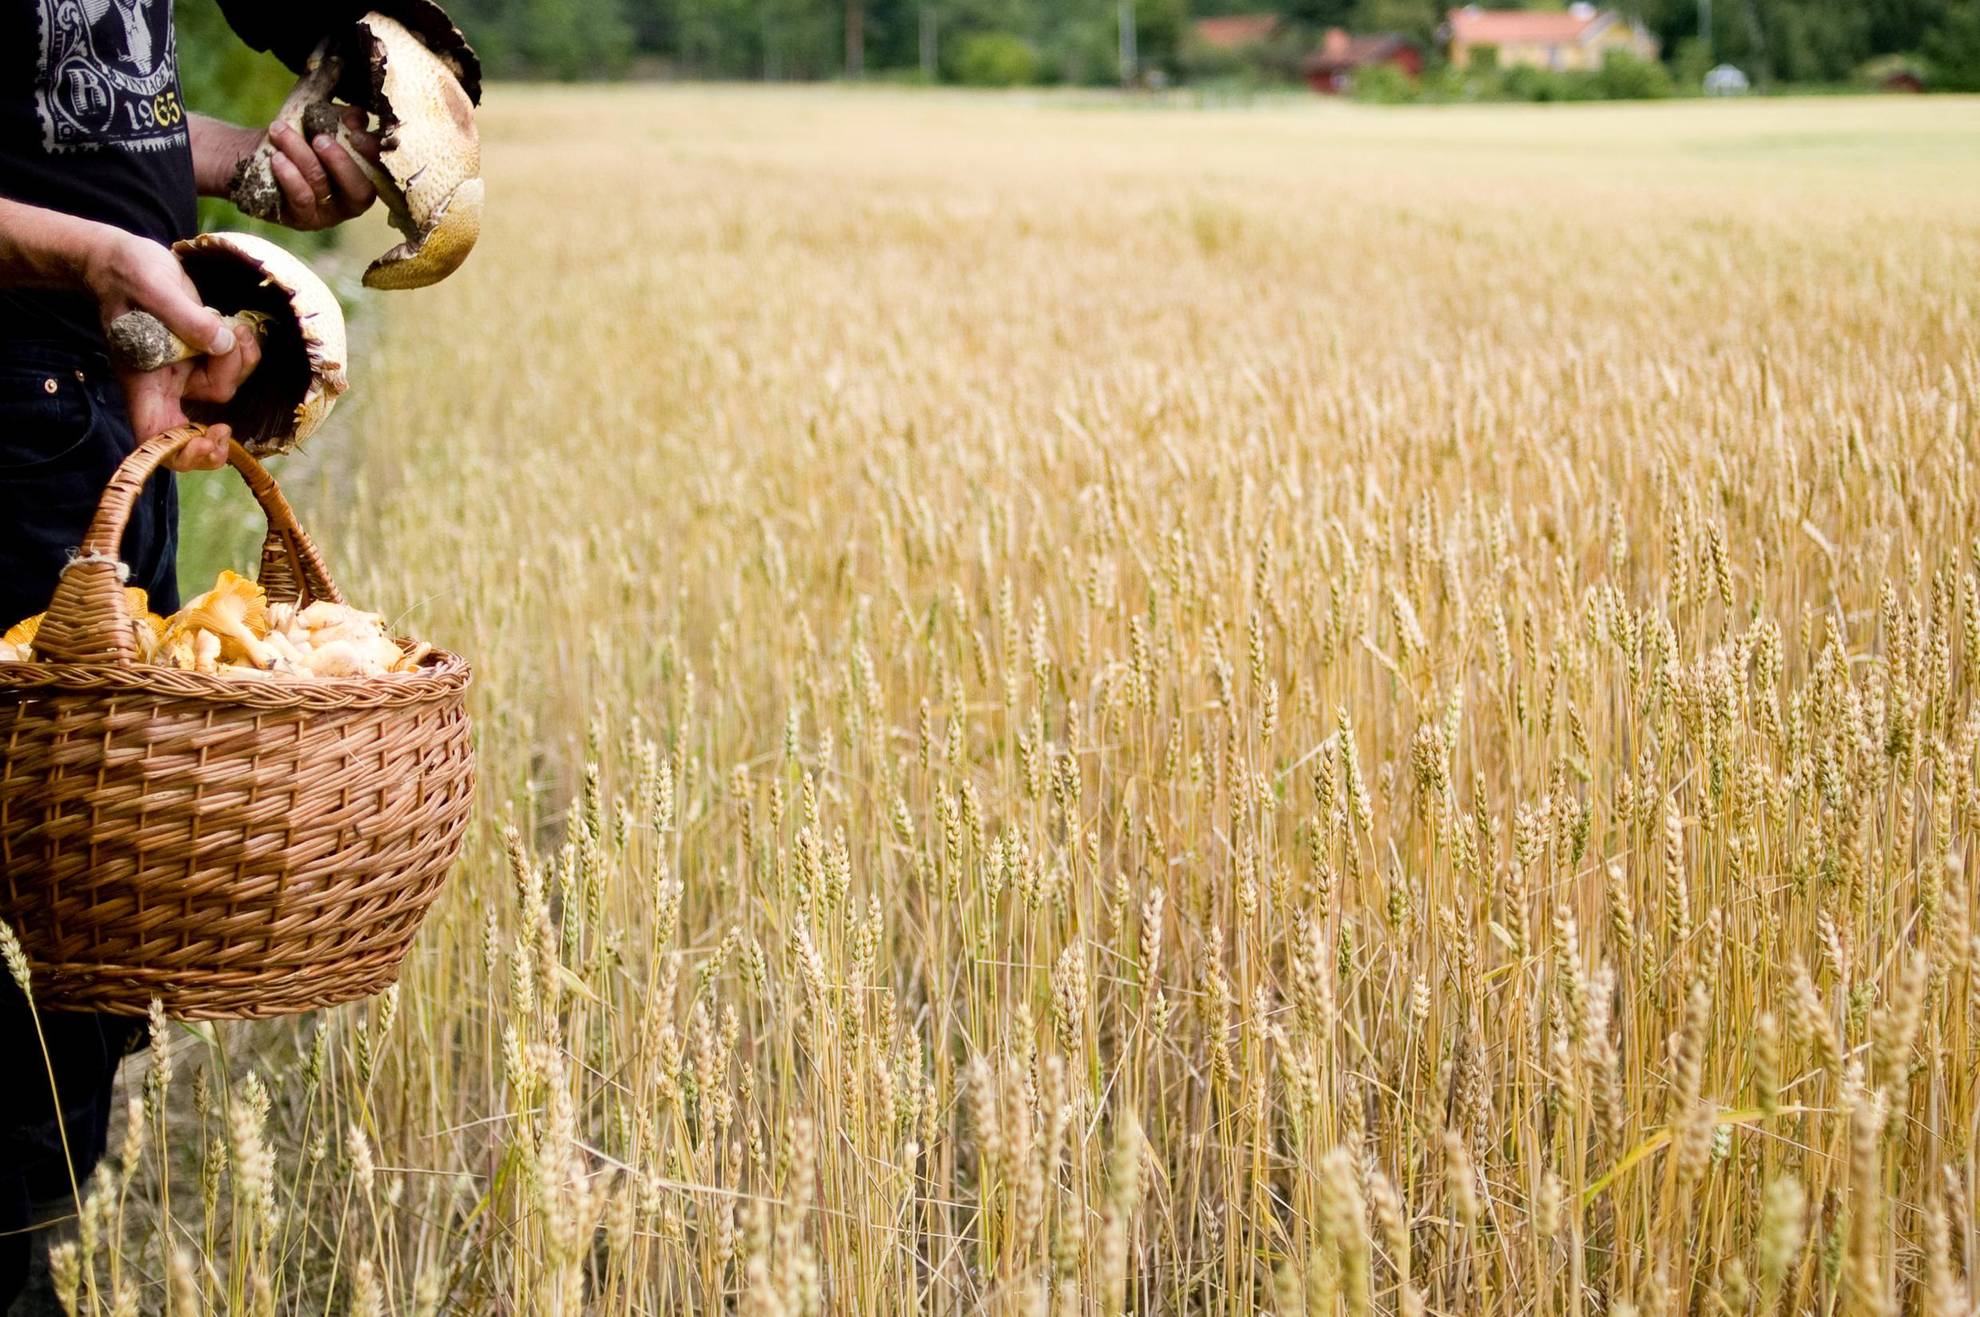 A person walks through a wheat field with mushrooms in his hands and more mushrooms in a basket held in his right hand.